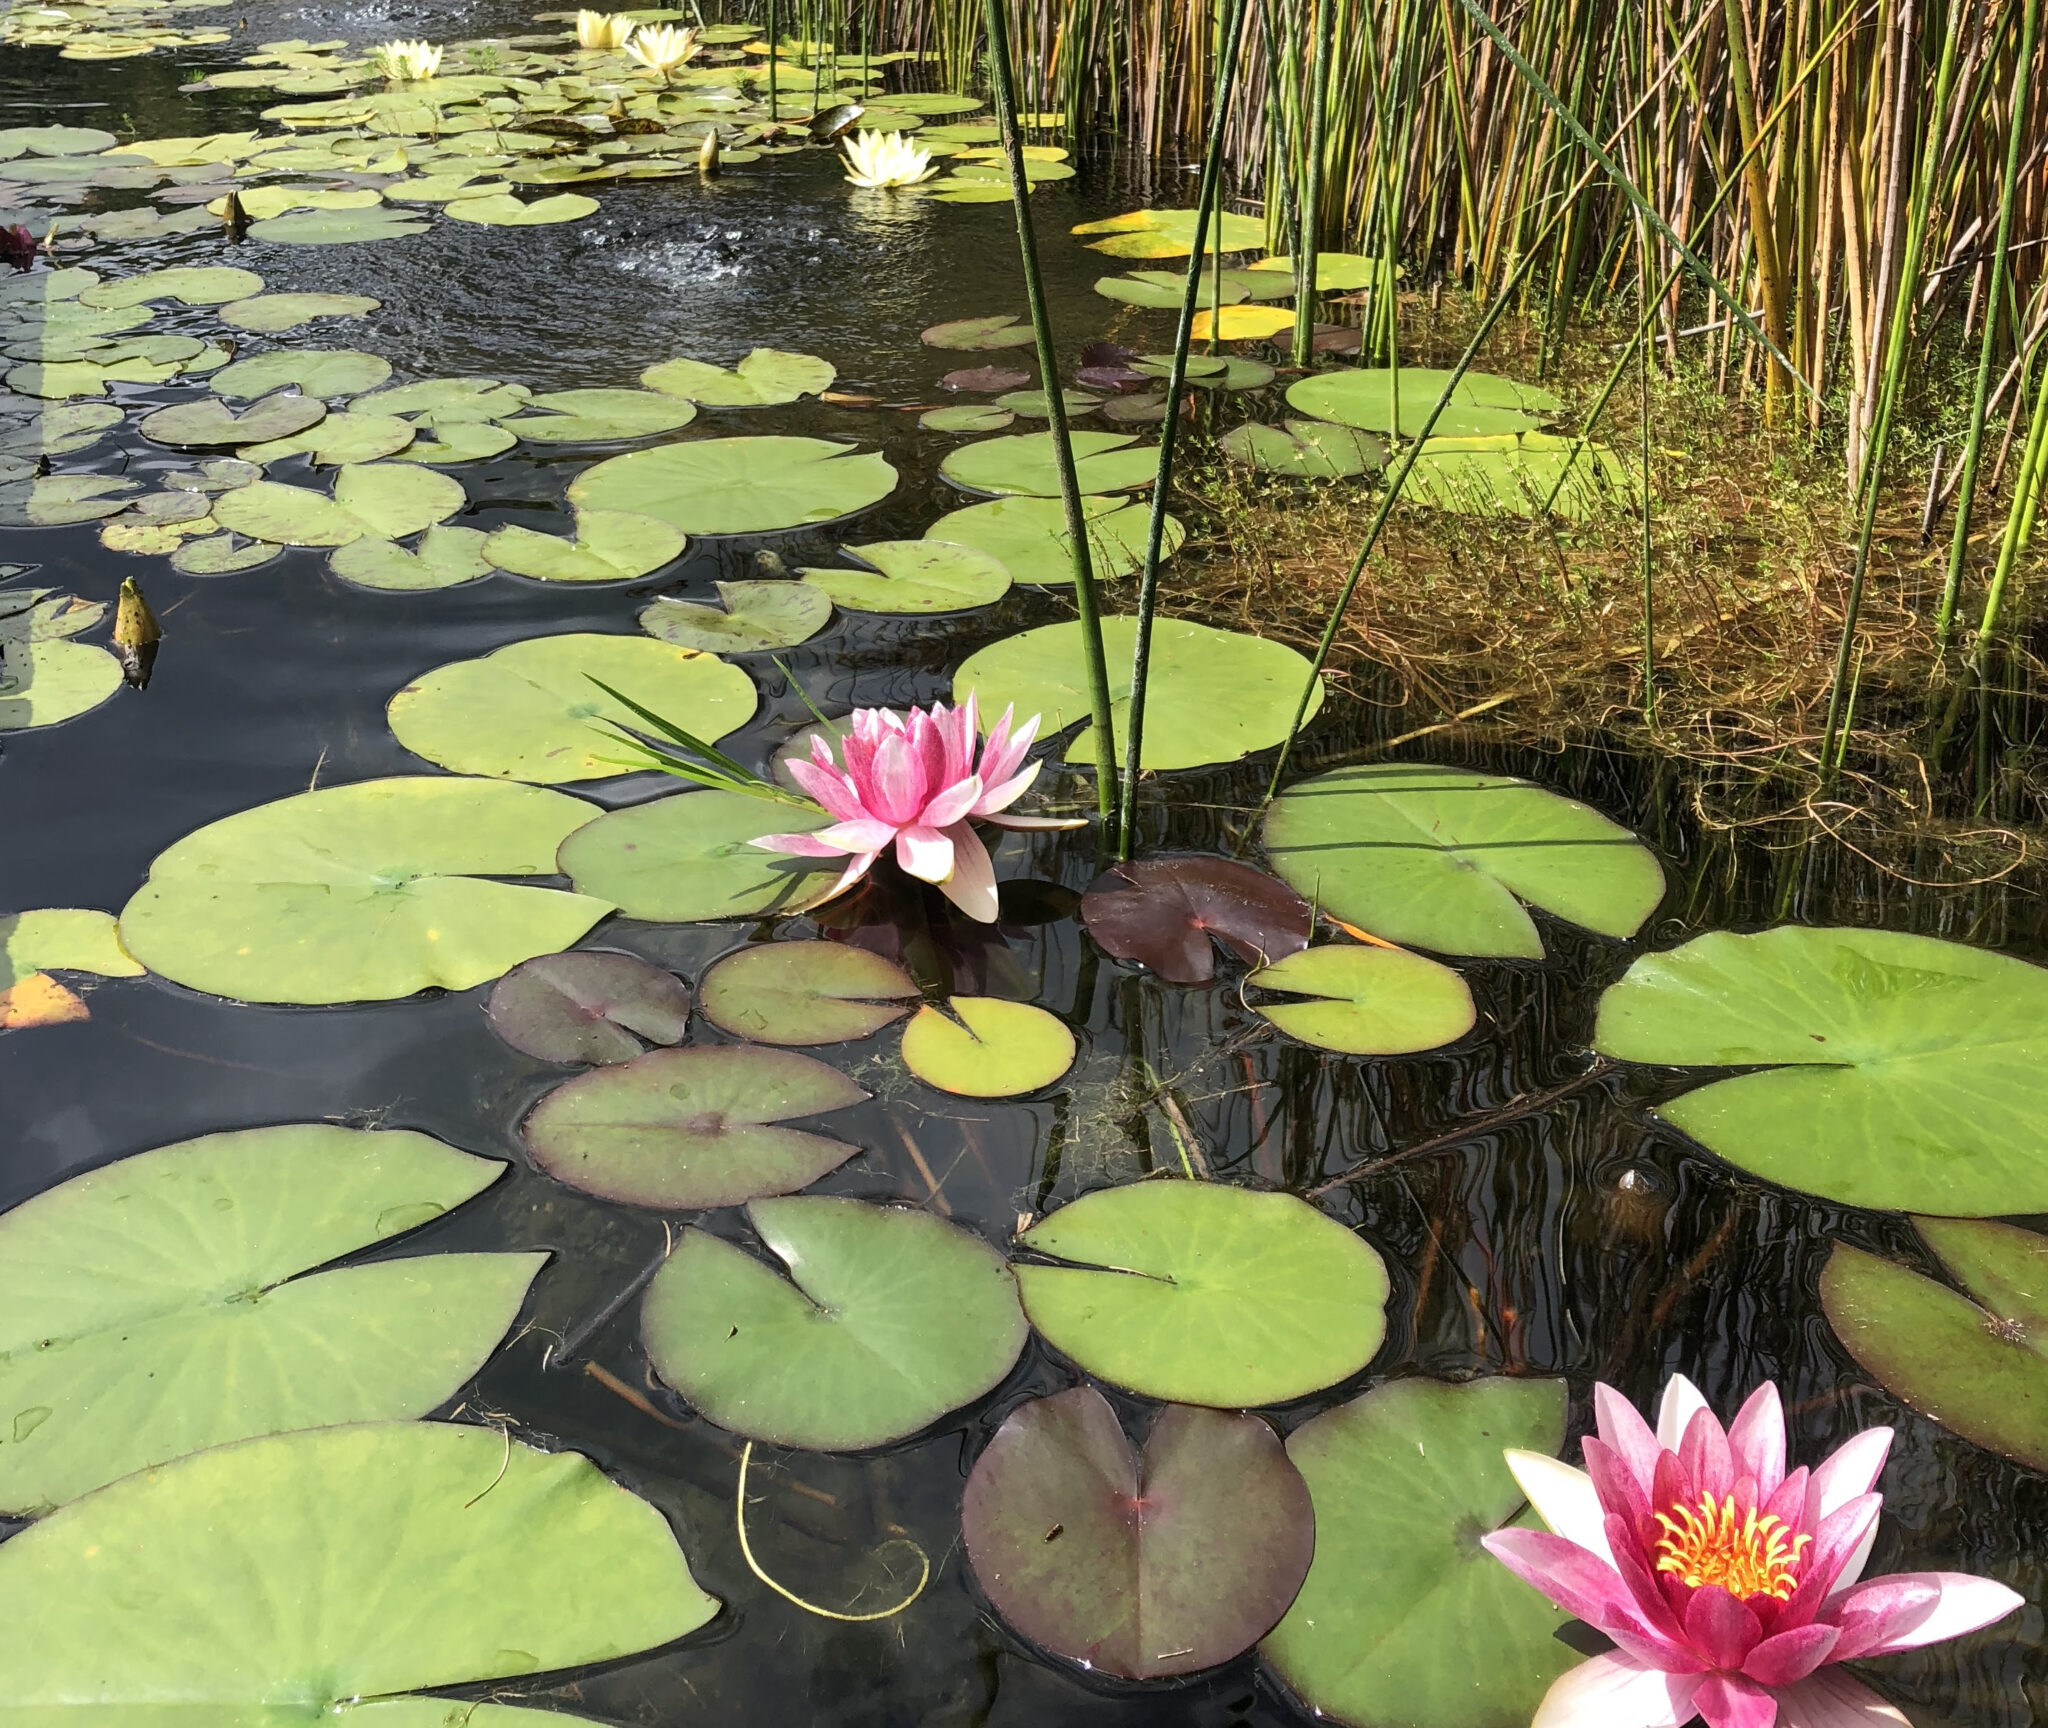 Pond plants provide an excellent spawning ground for fish